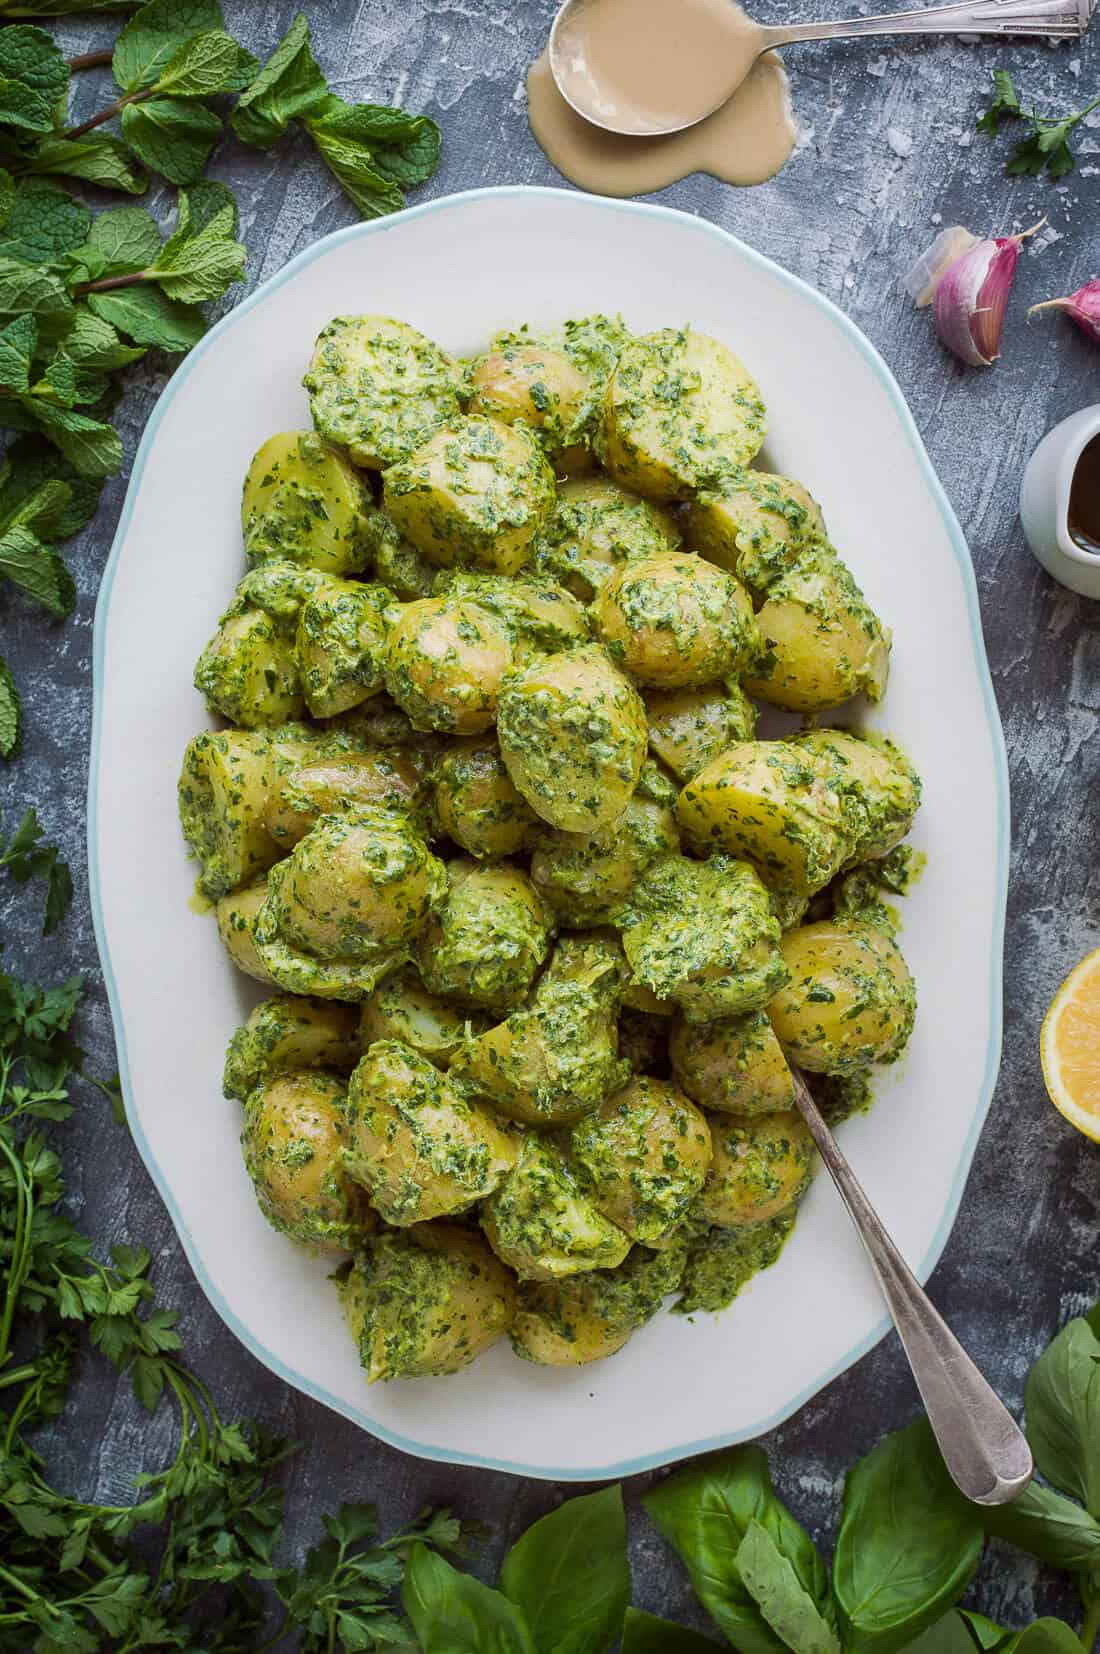 Potato salad with tahini herb dressing - warm Jersey Royal new potatoes tossed with a delicious tahini, herb and lemon dressing. The perfect side dish for Spring! (Vegan). #vegan #potatosalad